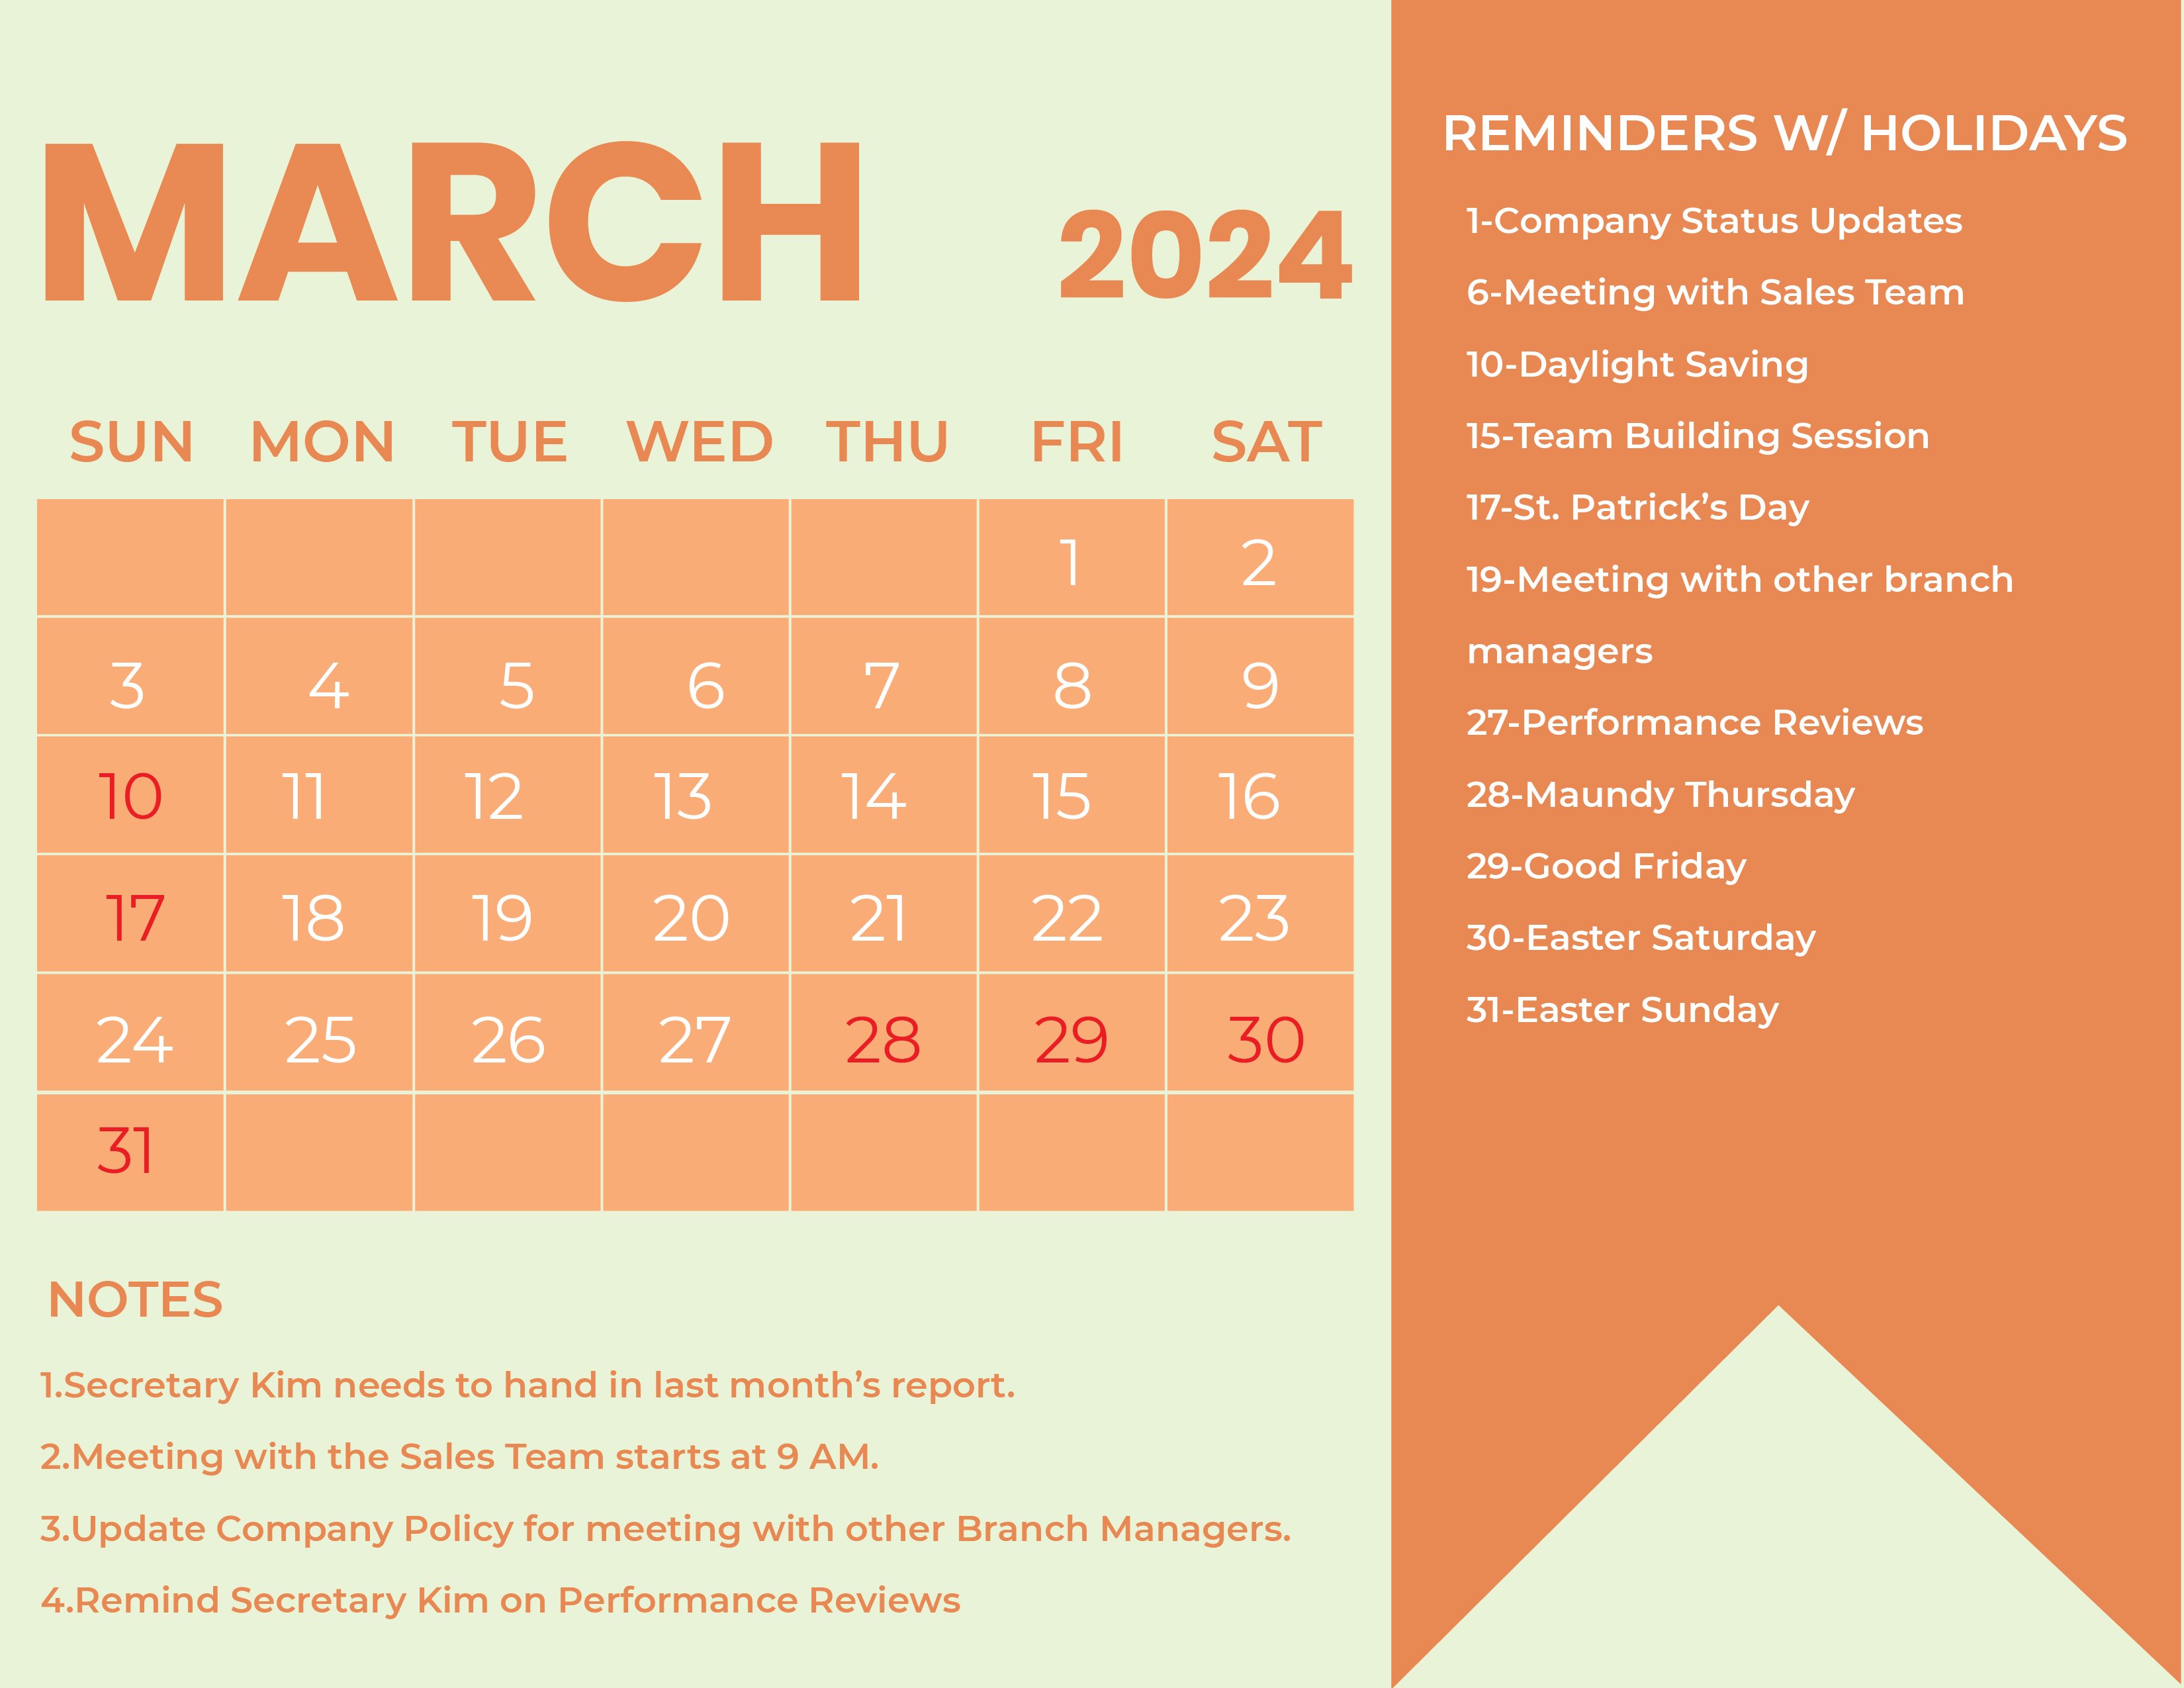 March 2023 Calendar Template With Holidays Download in Word, Google